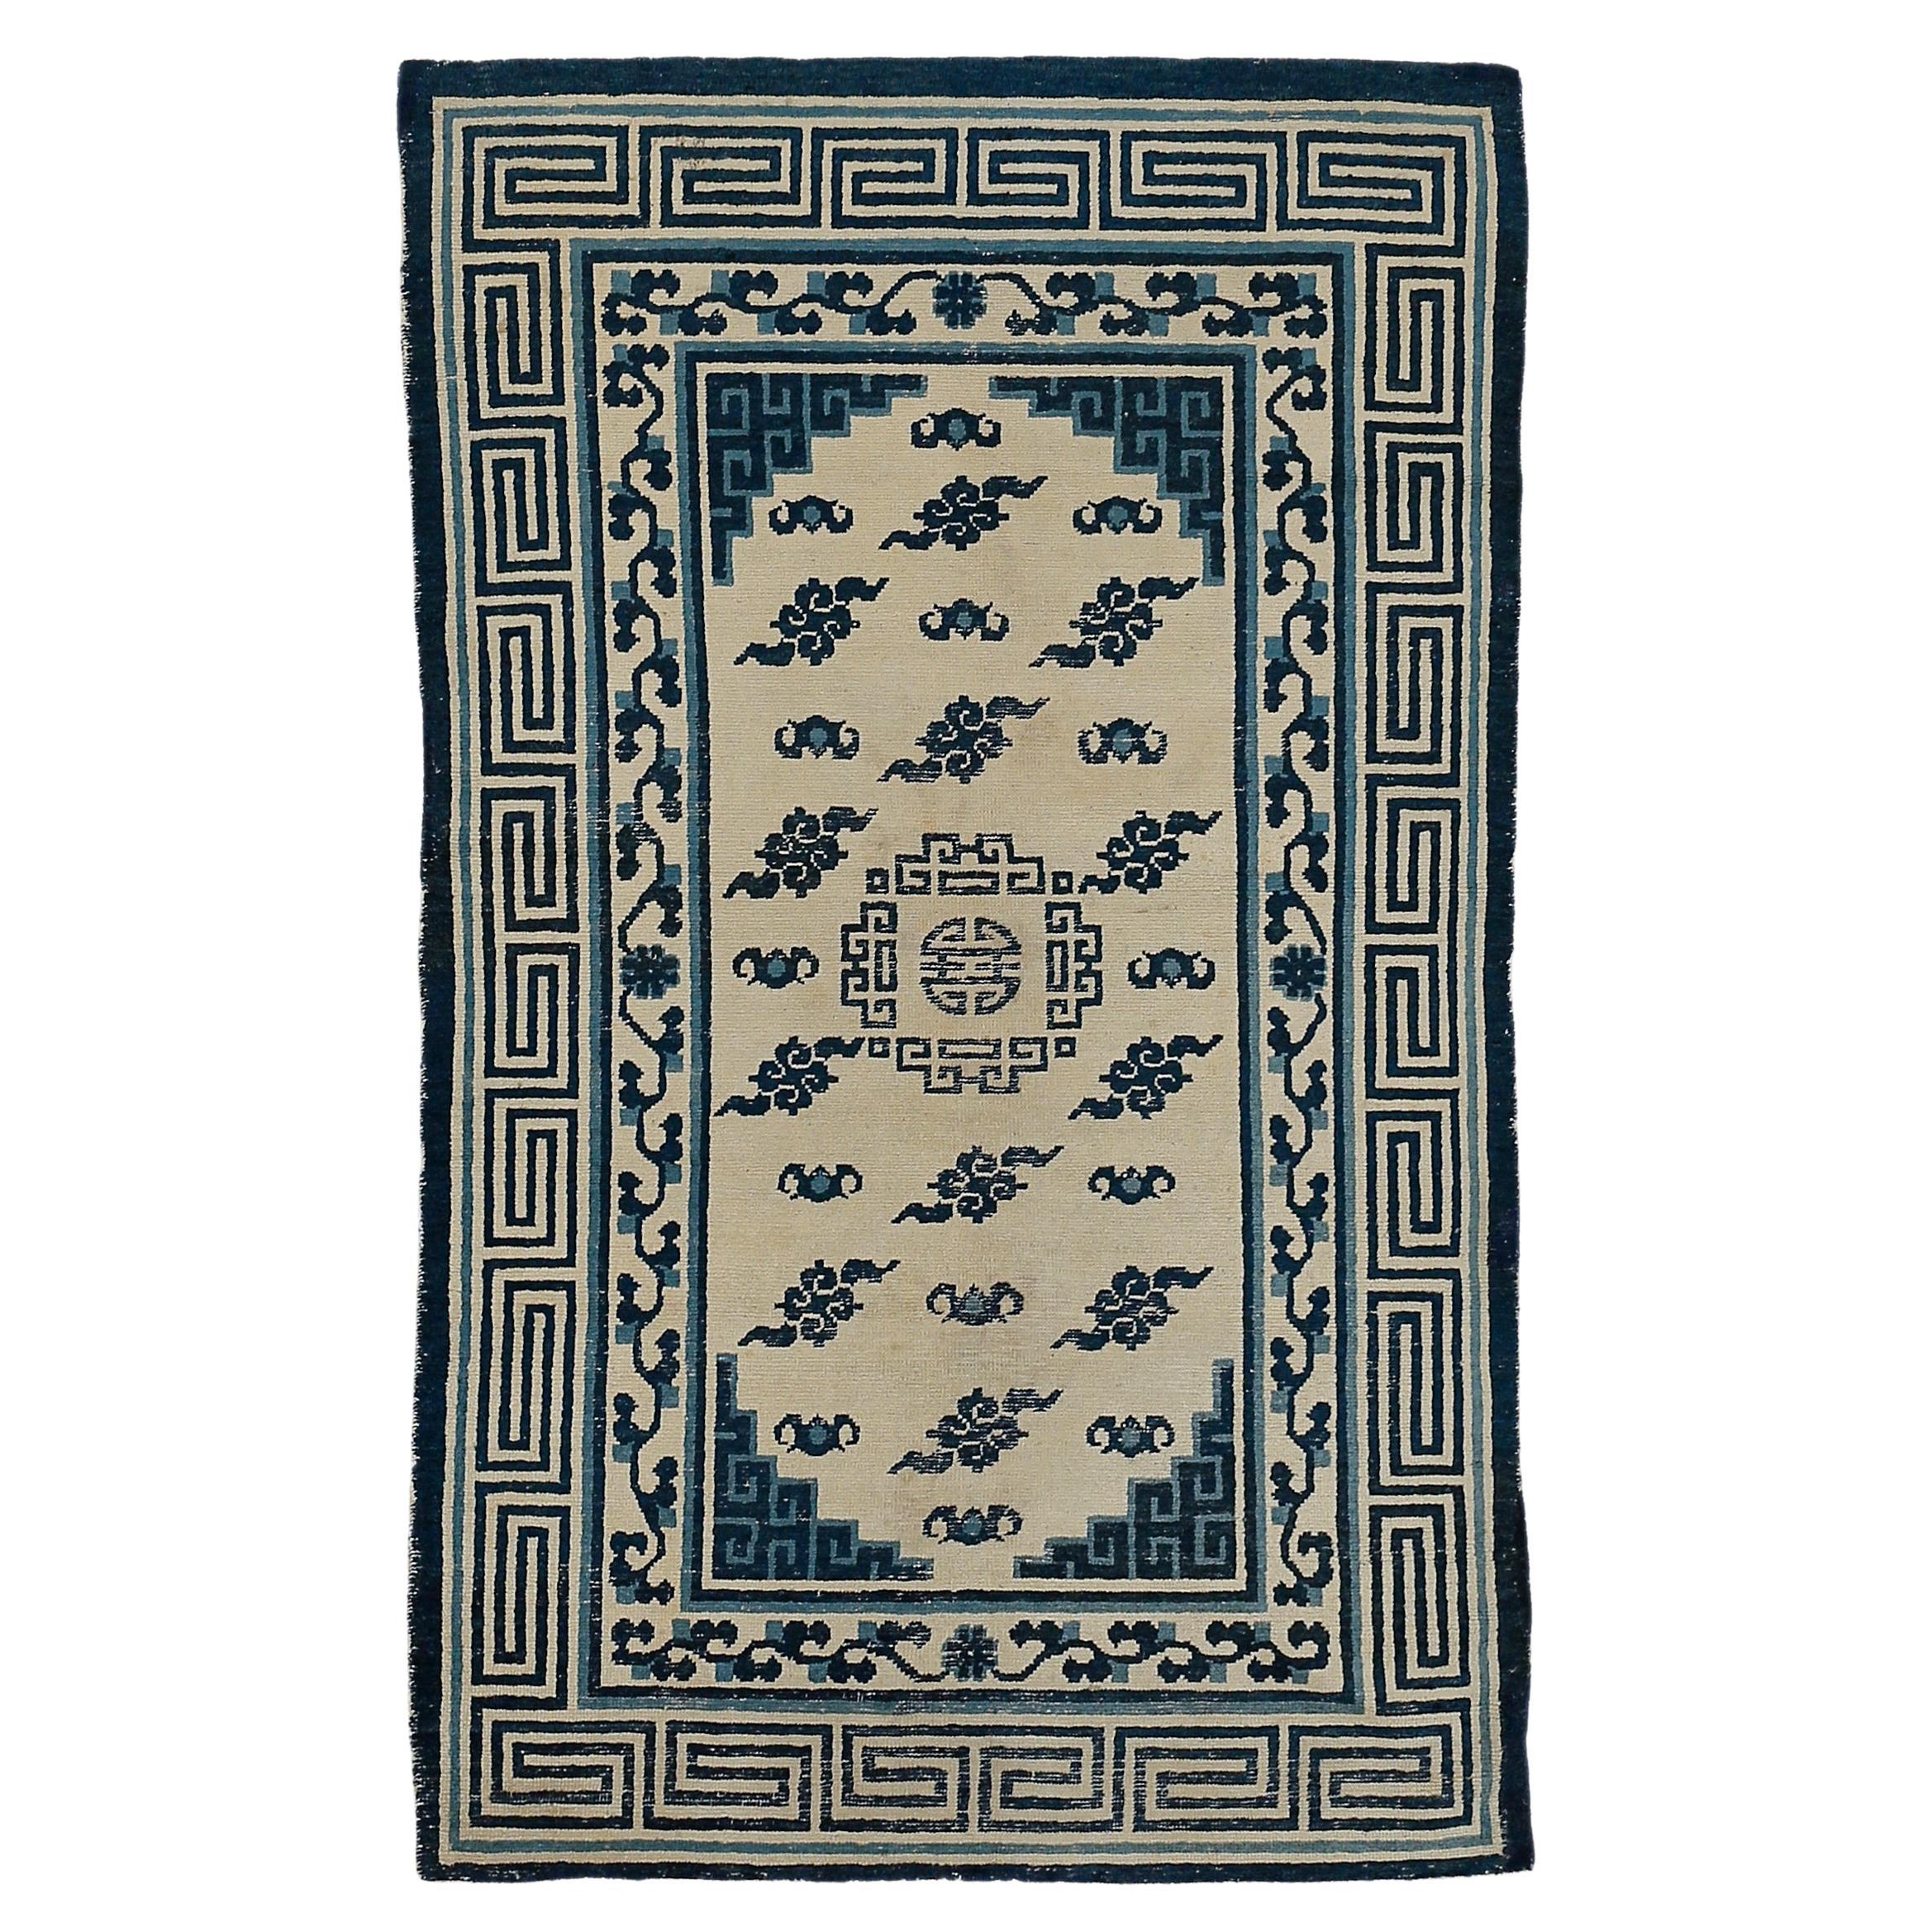 Antique Blue & White Mongolian Rug with Cloudbands and Longevity Symbols For Sale